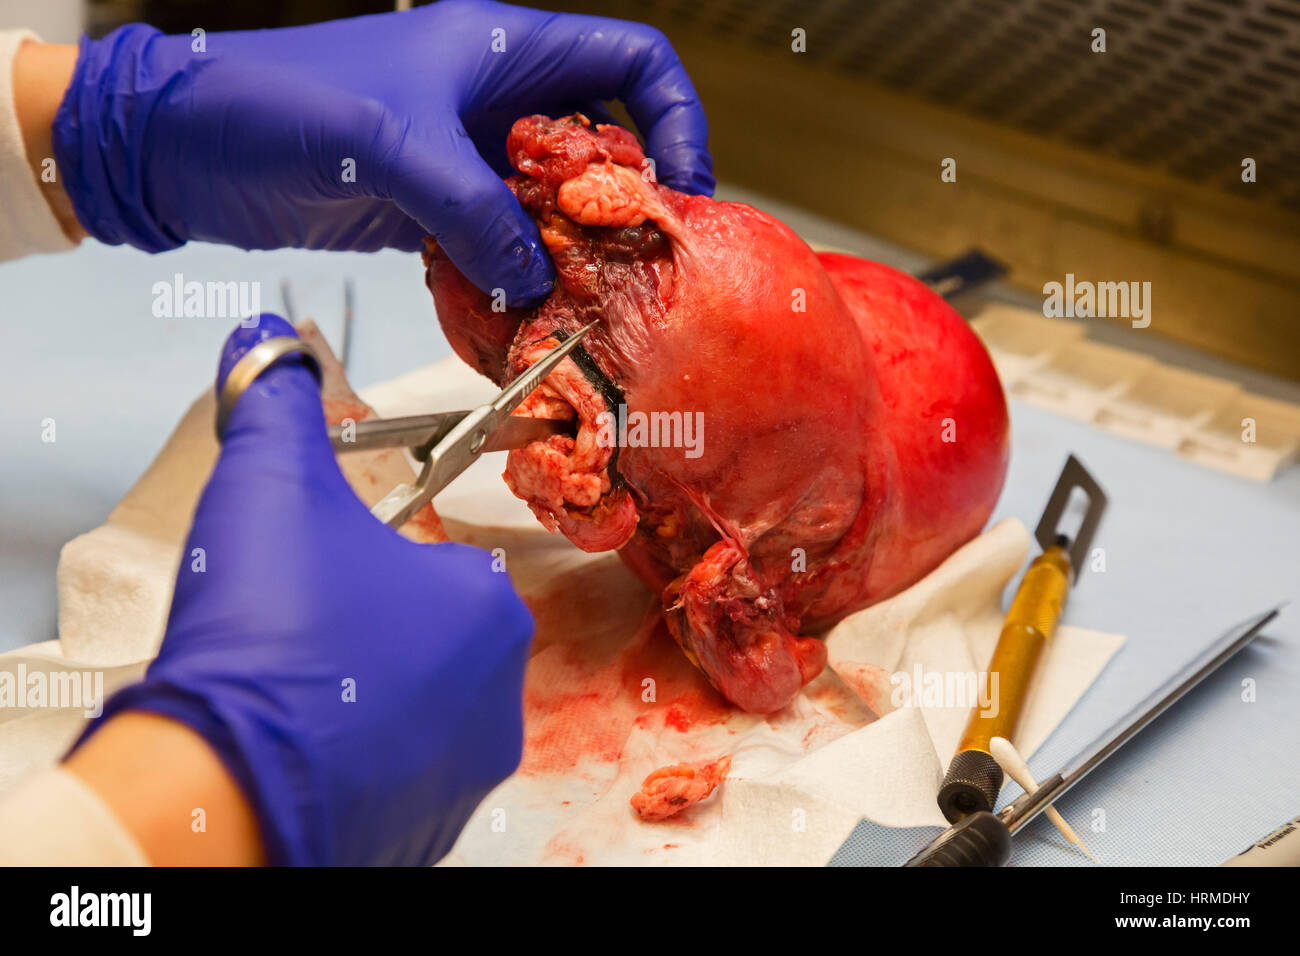 Detroit, Michigan - A pathology assistant at the Detroit Medical Center examines a uterus with endometrial adenocarcinoma. Stock Photo